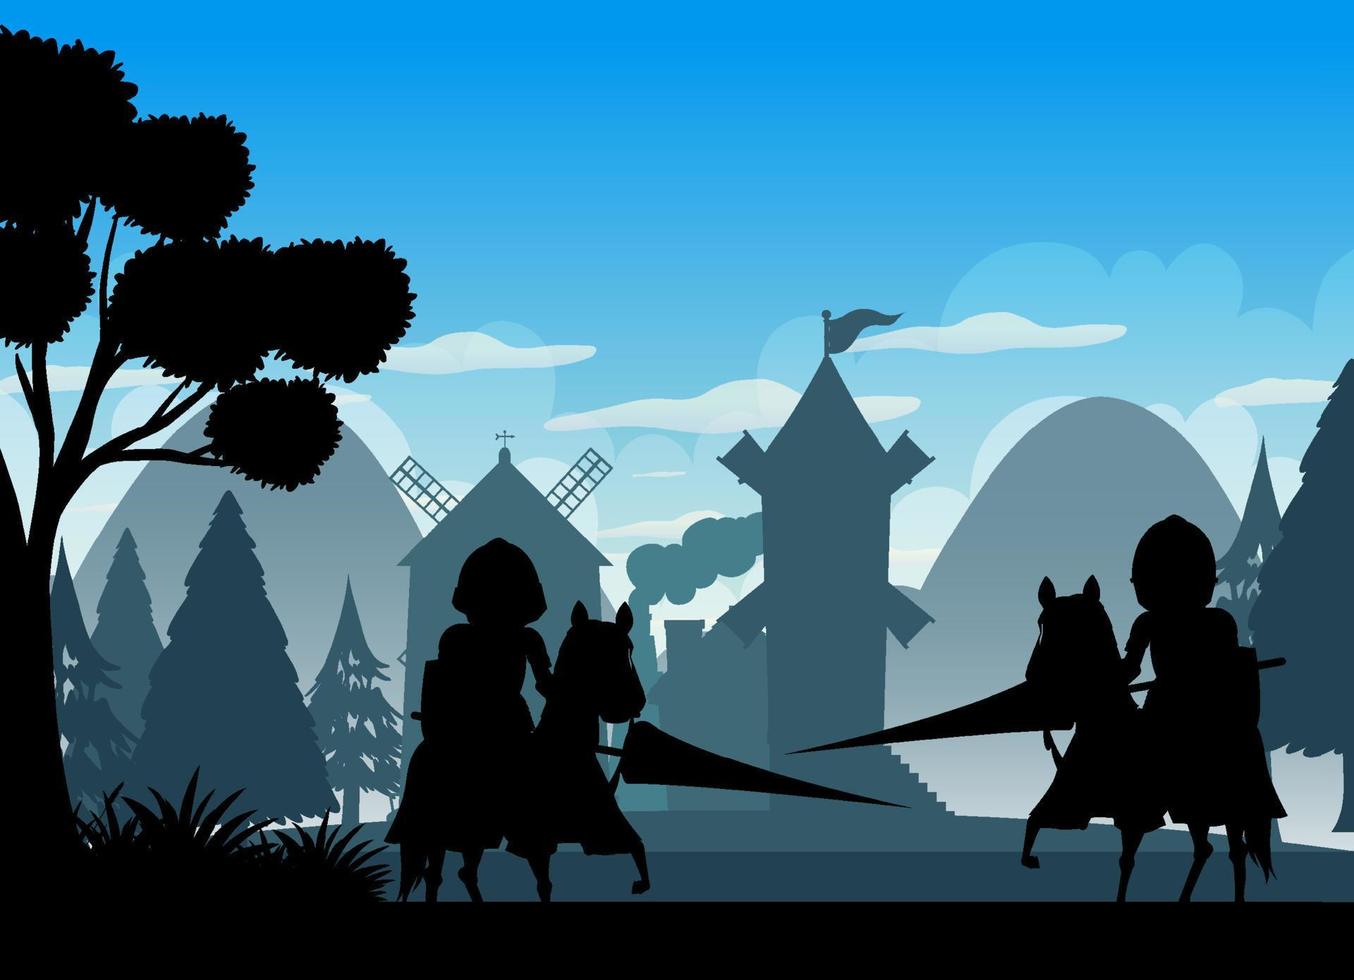 Silhouette scene with medieval vector